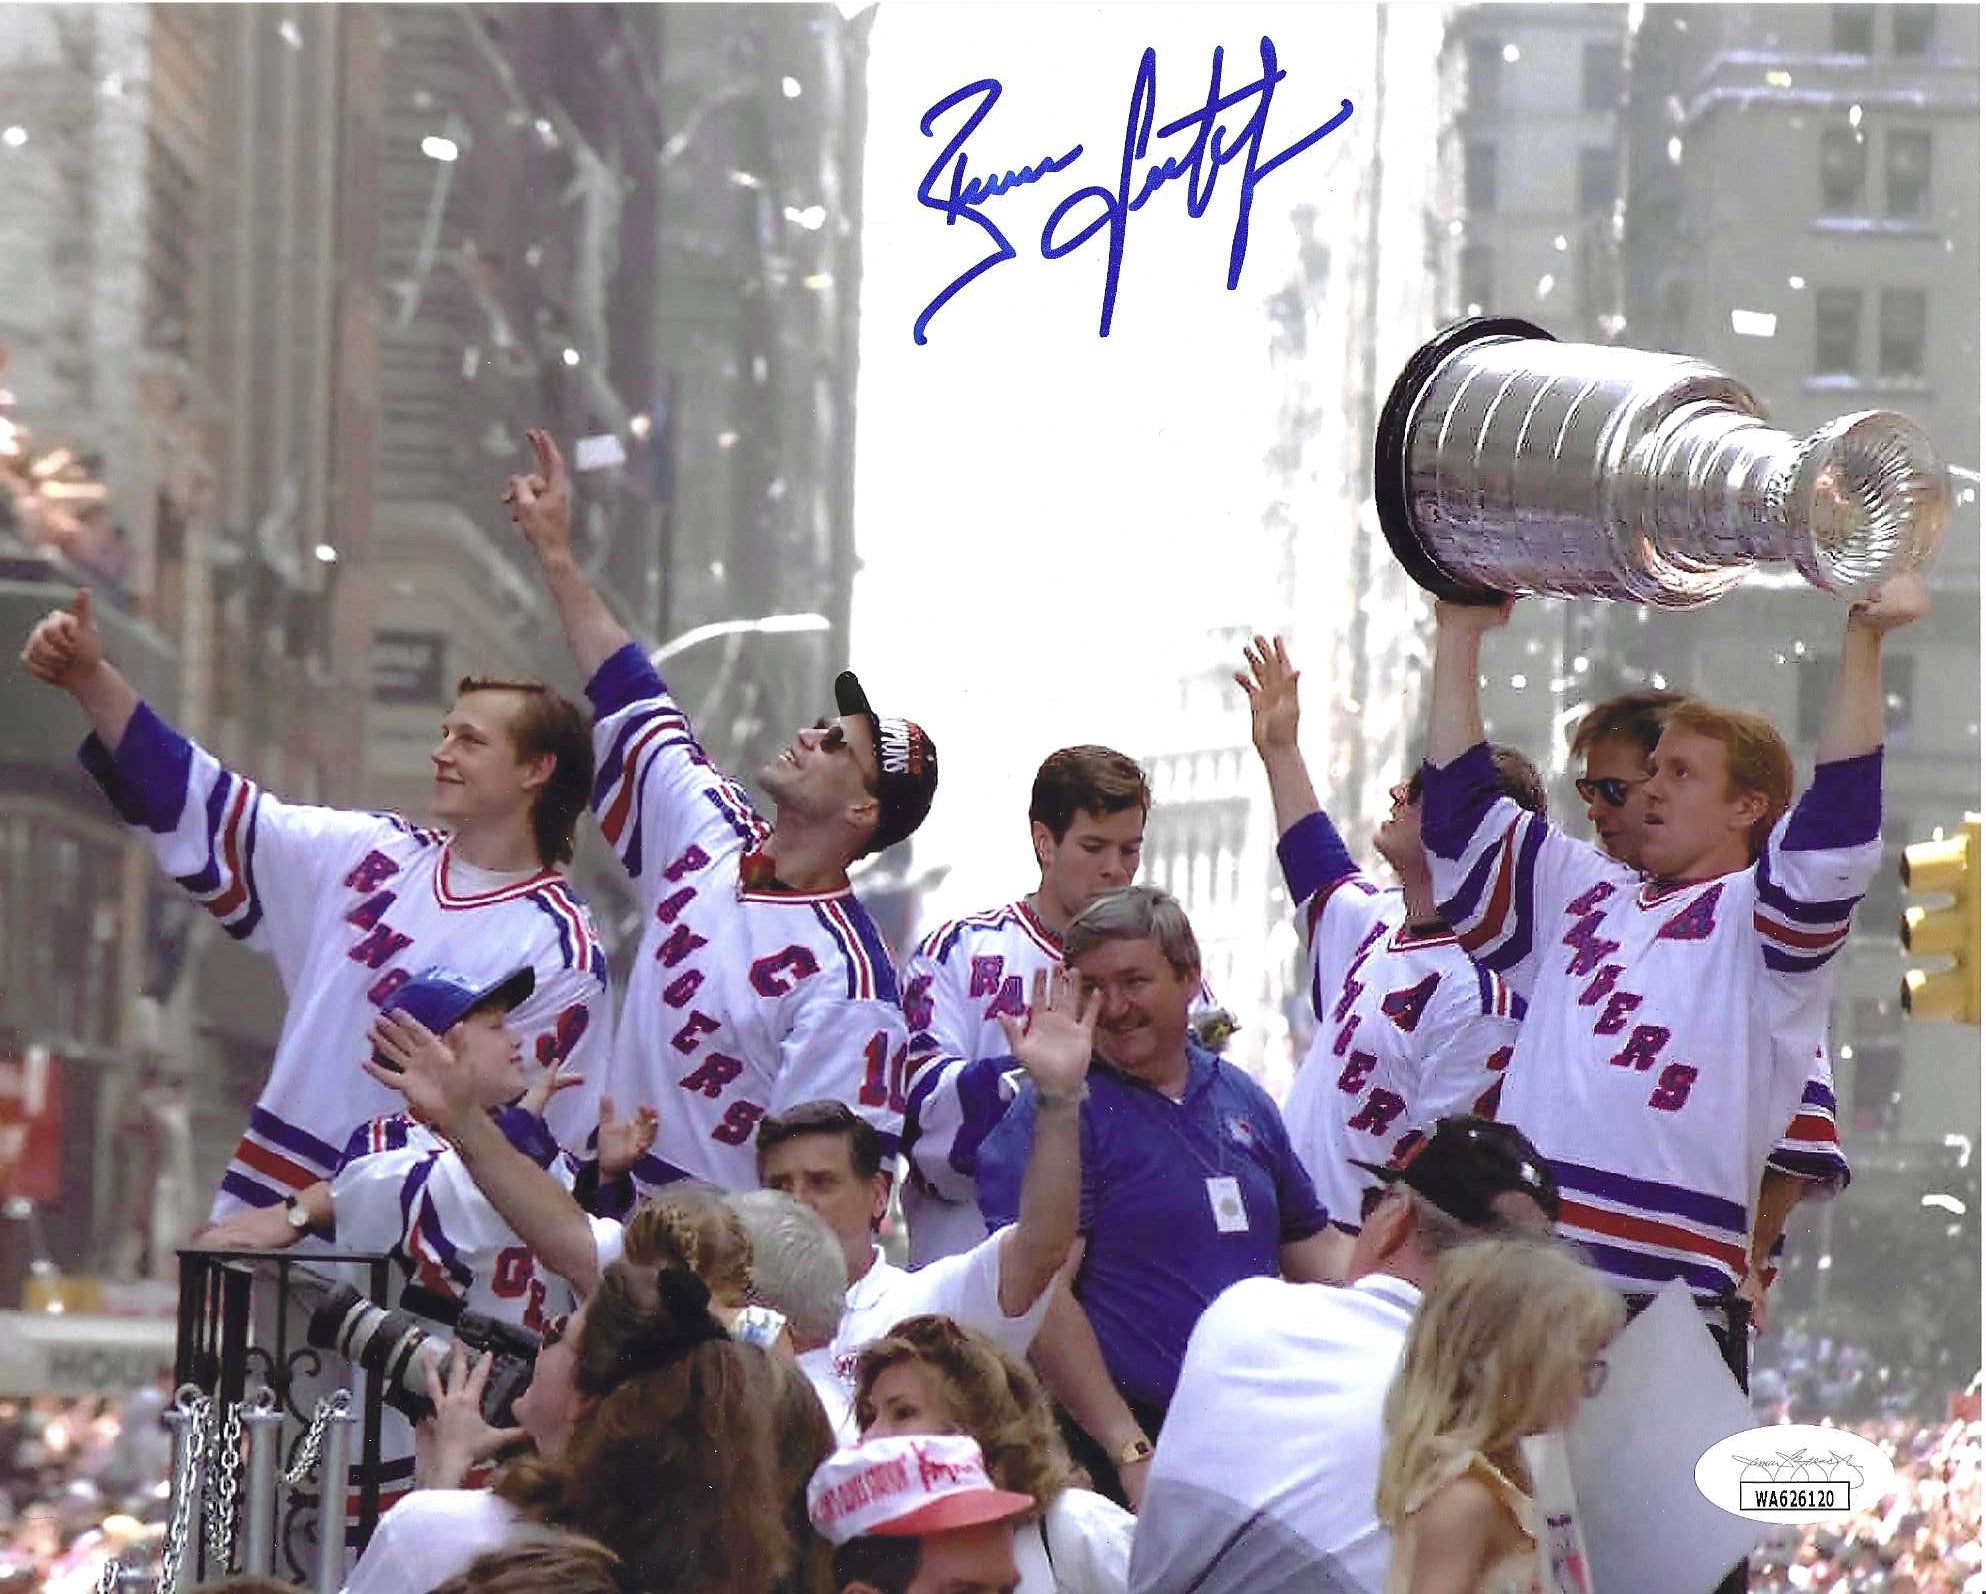 New York Rangers - Autographed Signed Photograph With Co-Signers